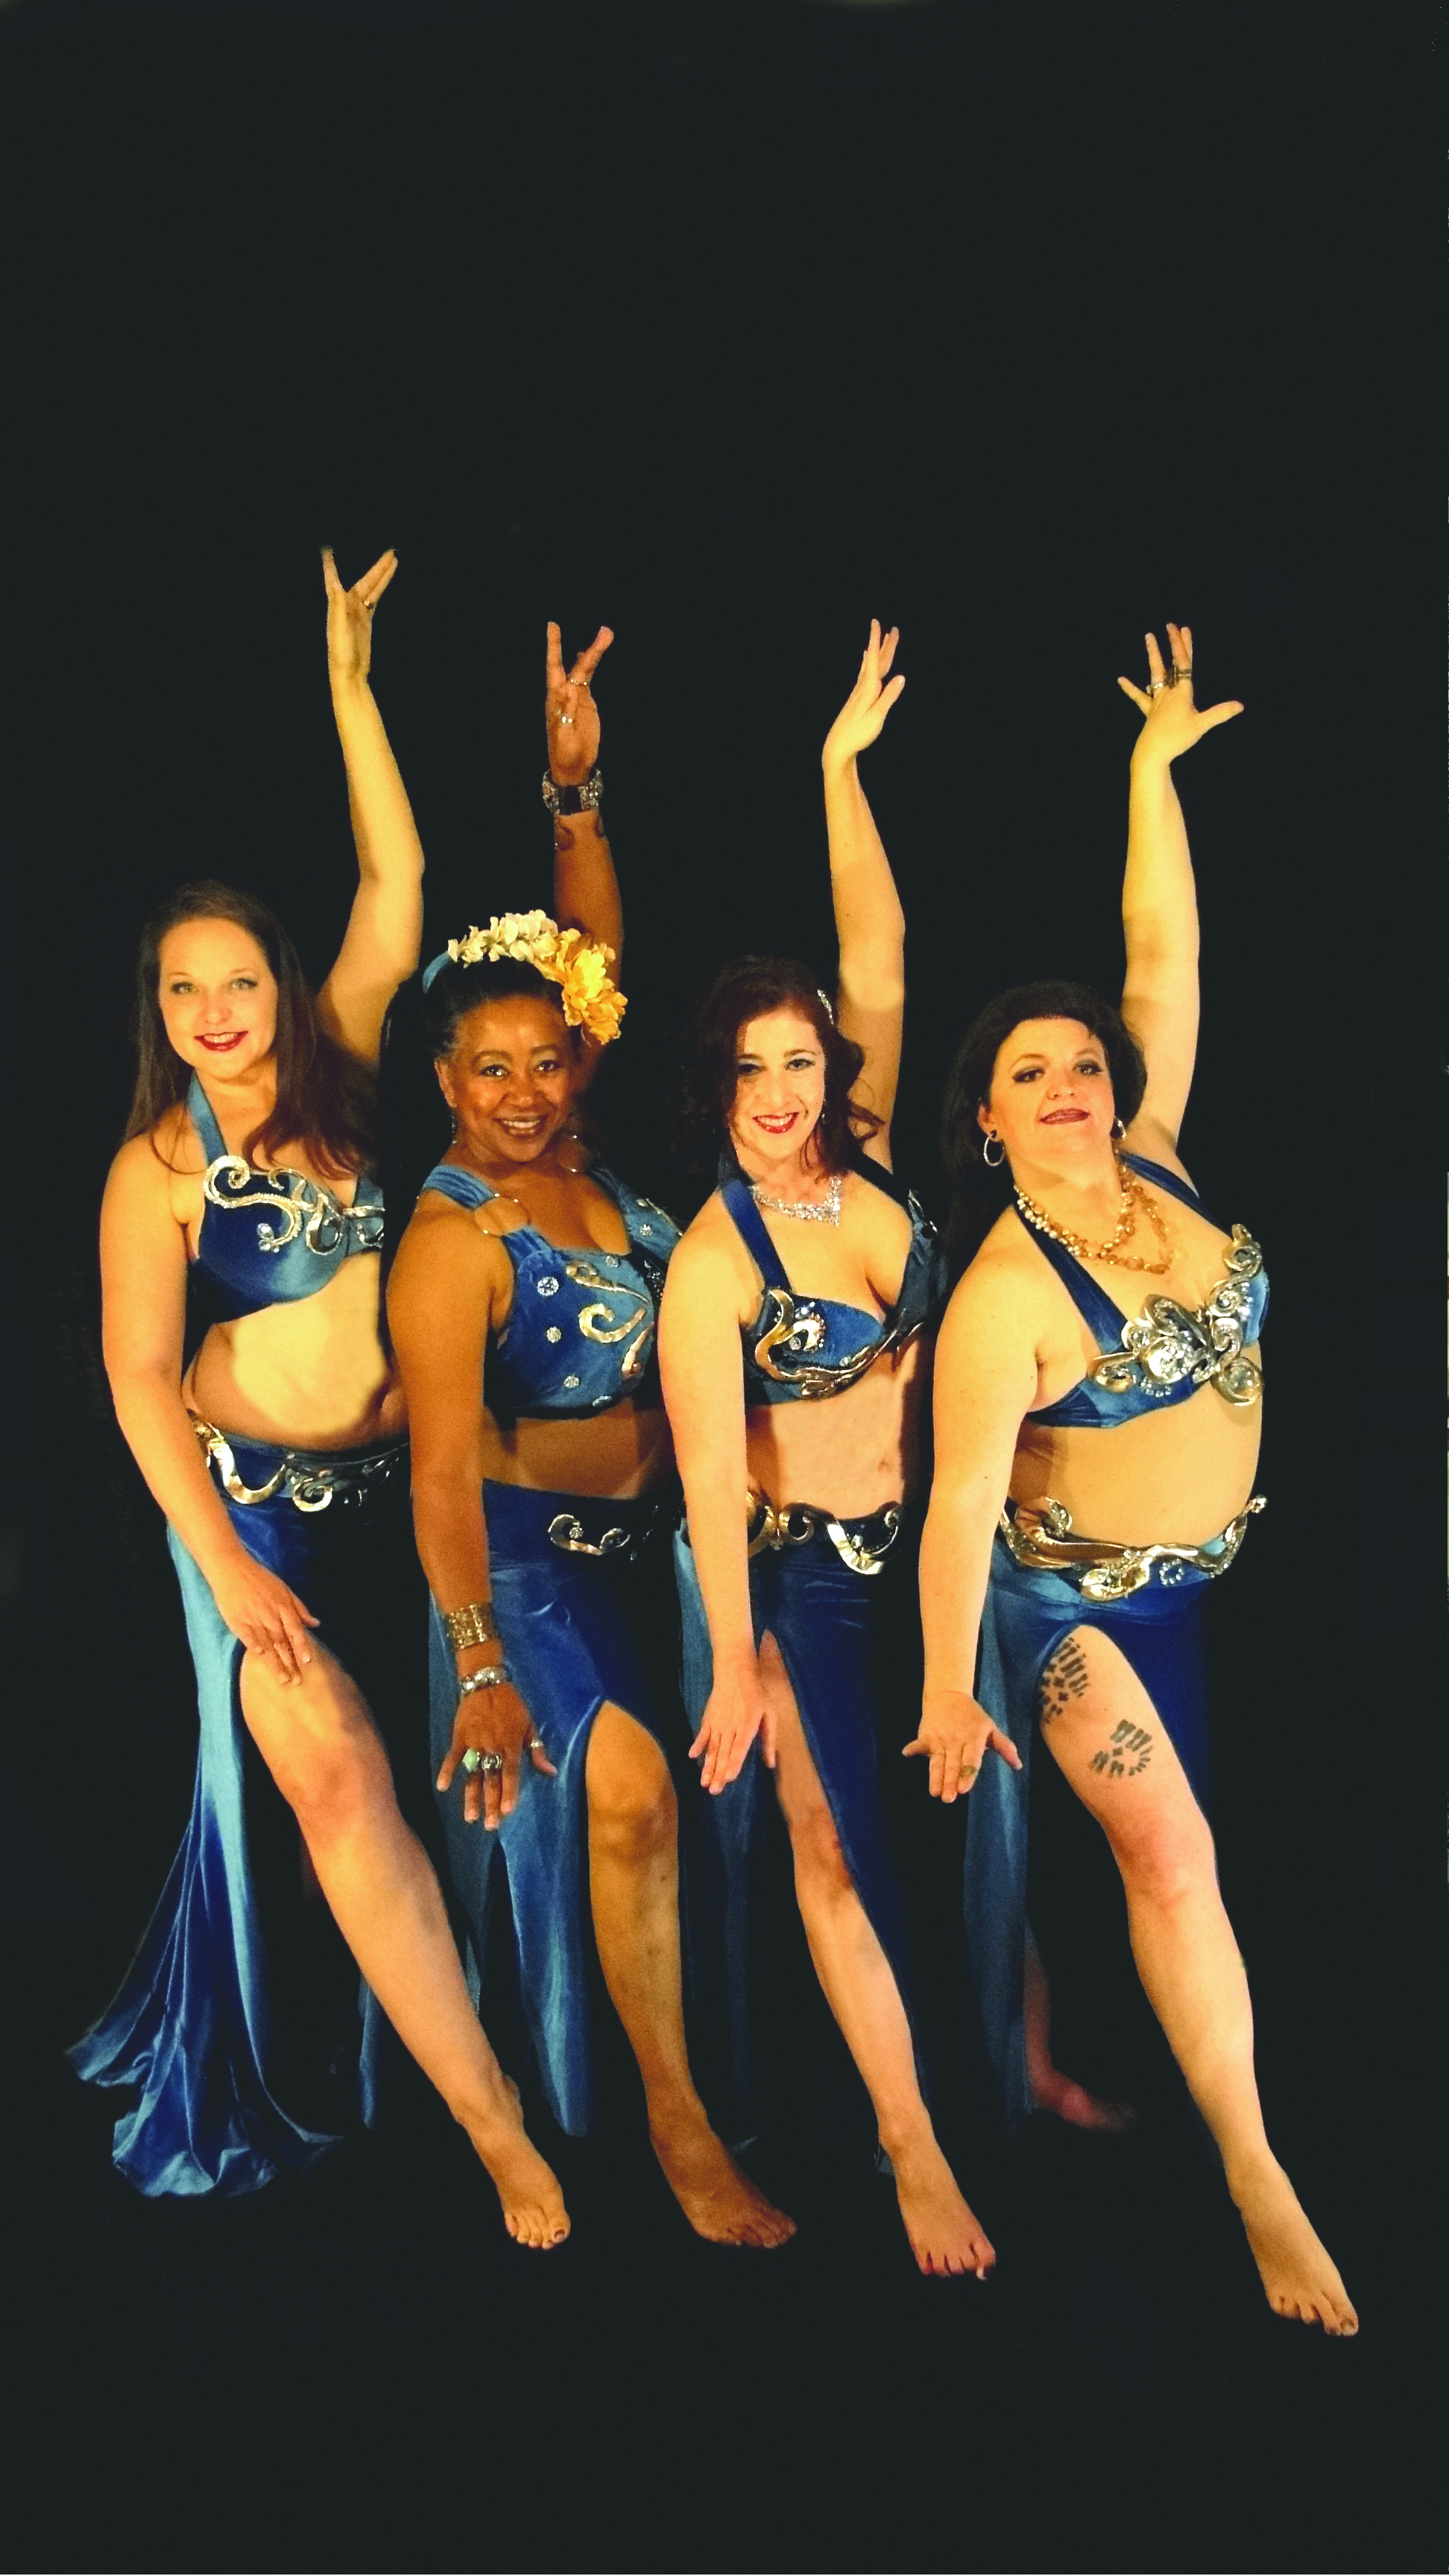 Local belly dancer group to hold production Feb. 16 in Auburn